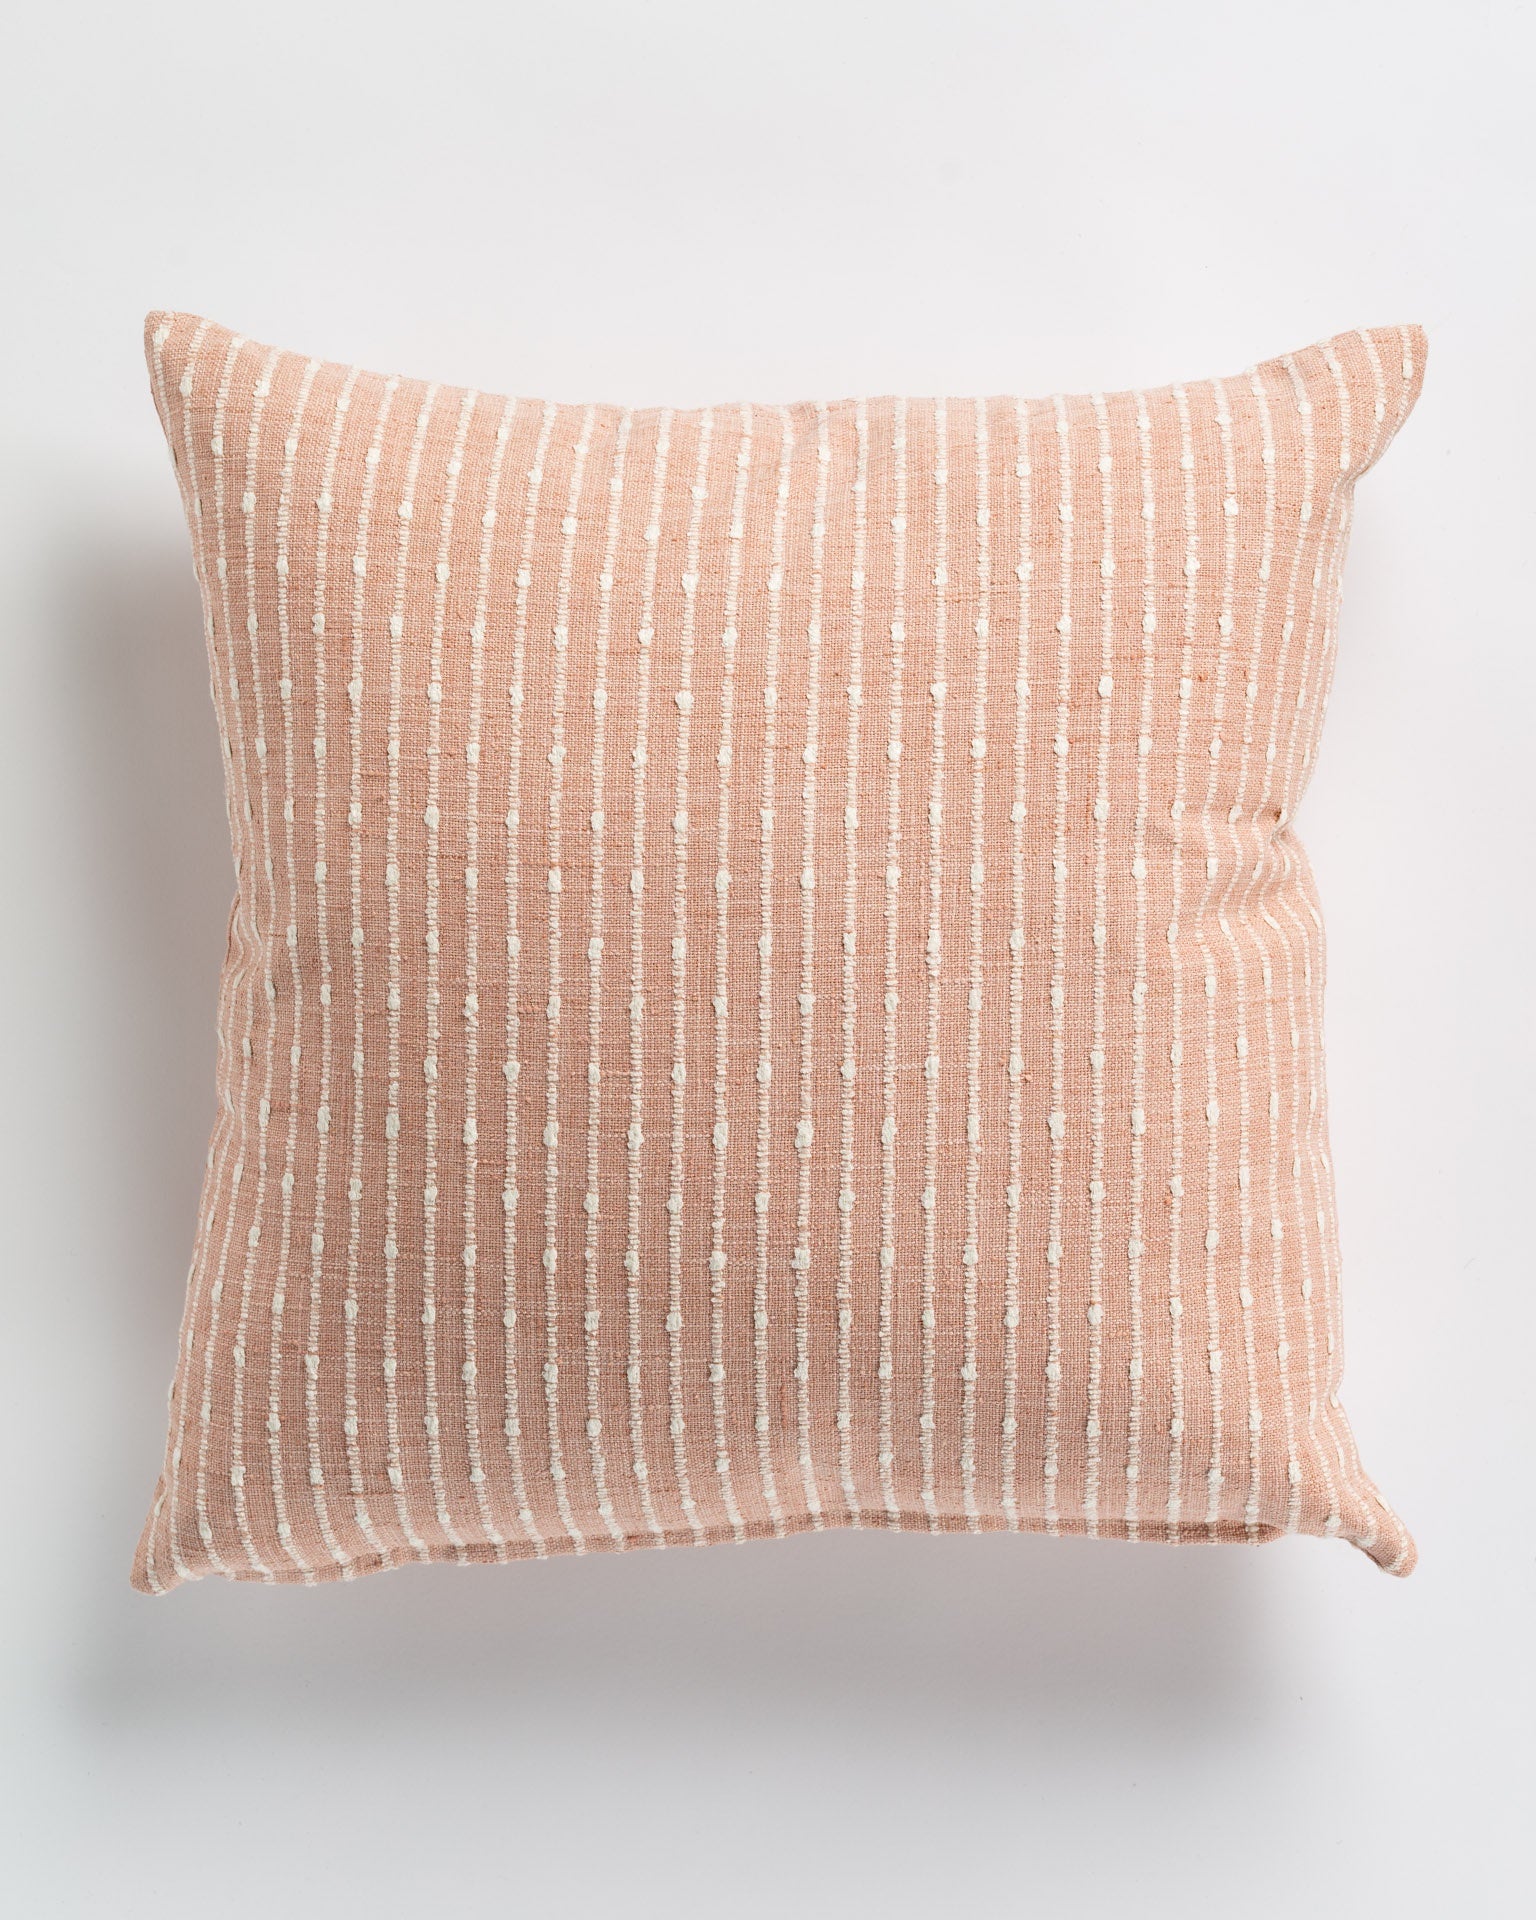 Gabby&#39;s Hopscotch Blush 26x26 decorative pillow with a salmon pink and white striped pattern, featuring textured vertical dashes aligned along the stripes, displayed in an Arizona style on a white background.